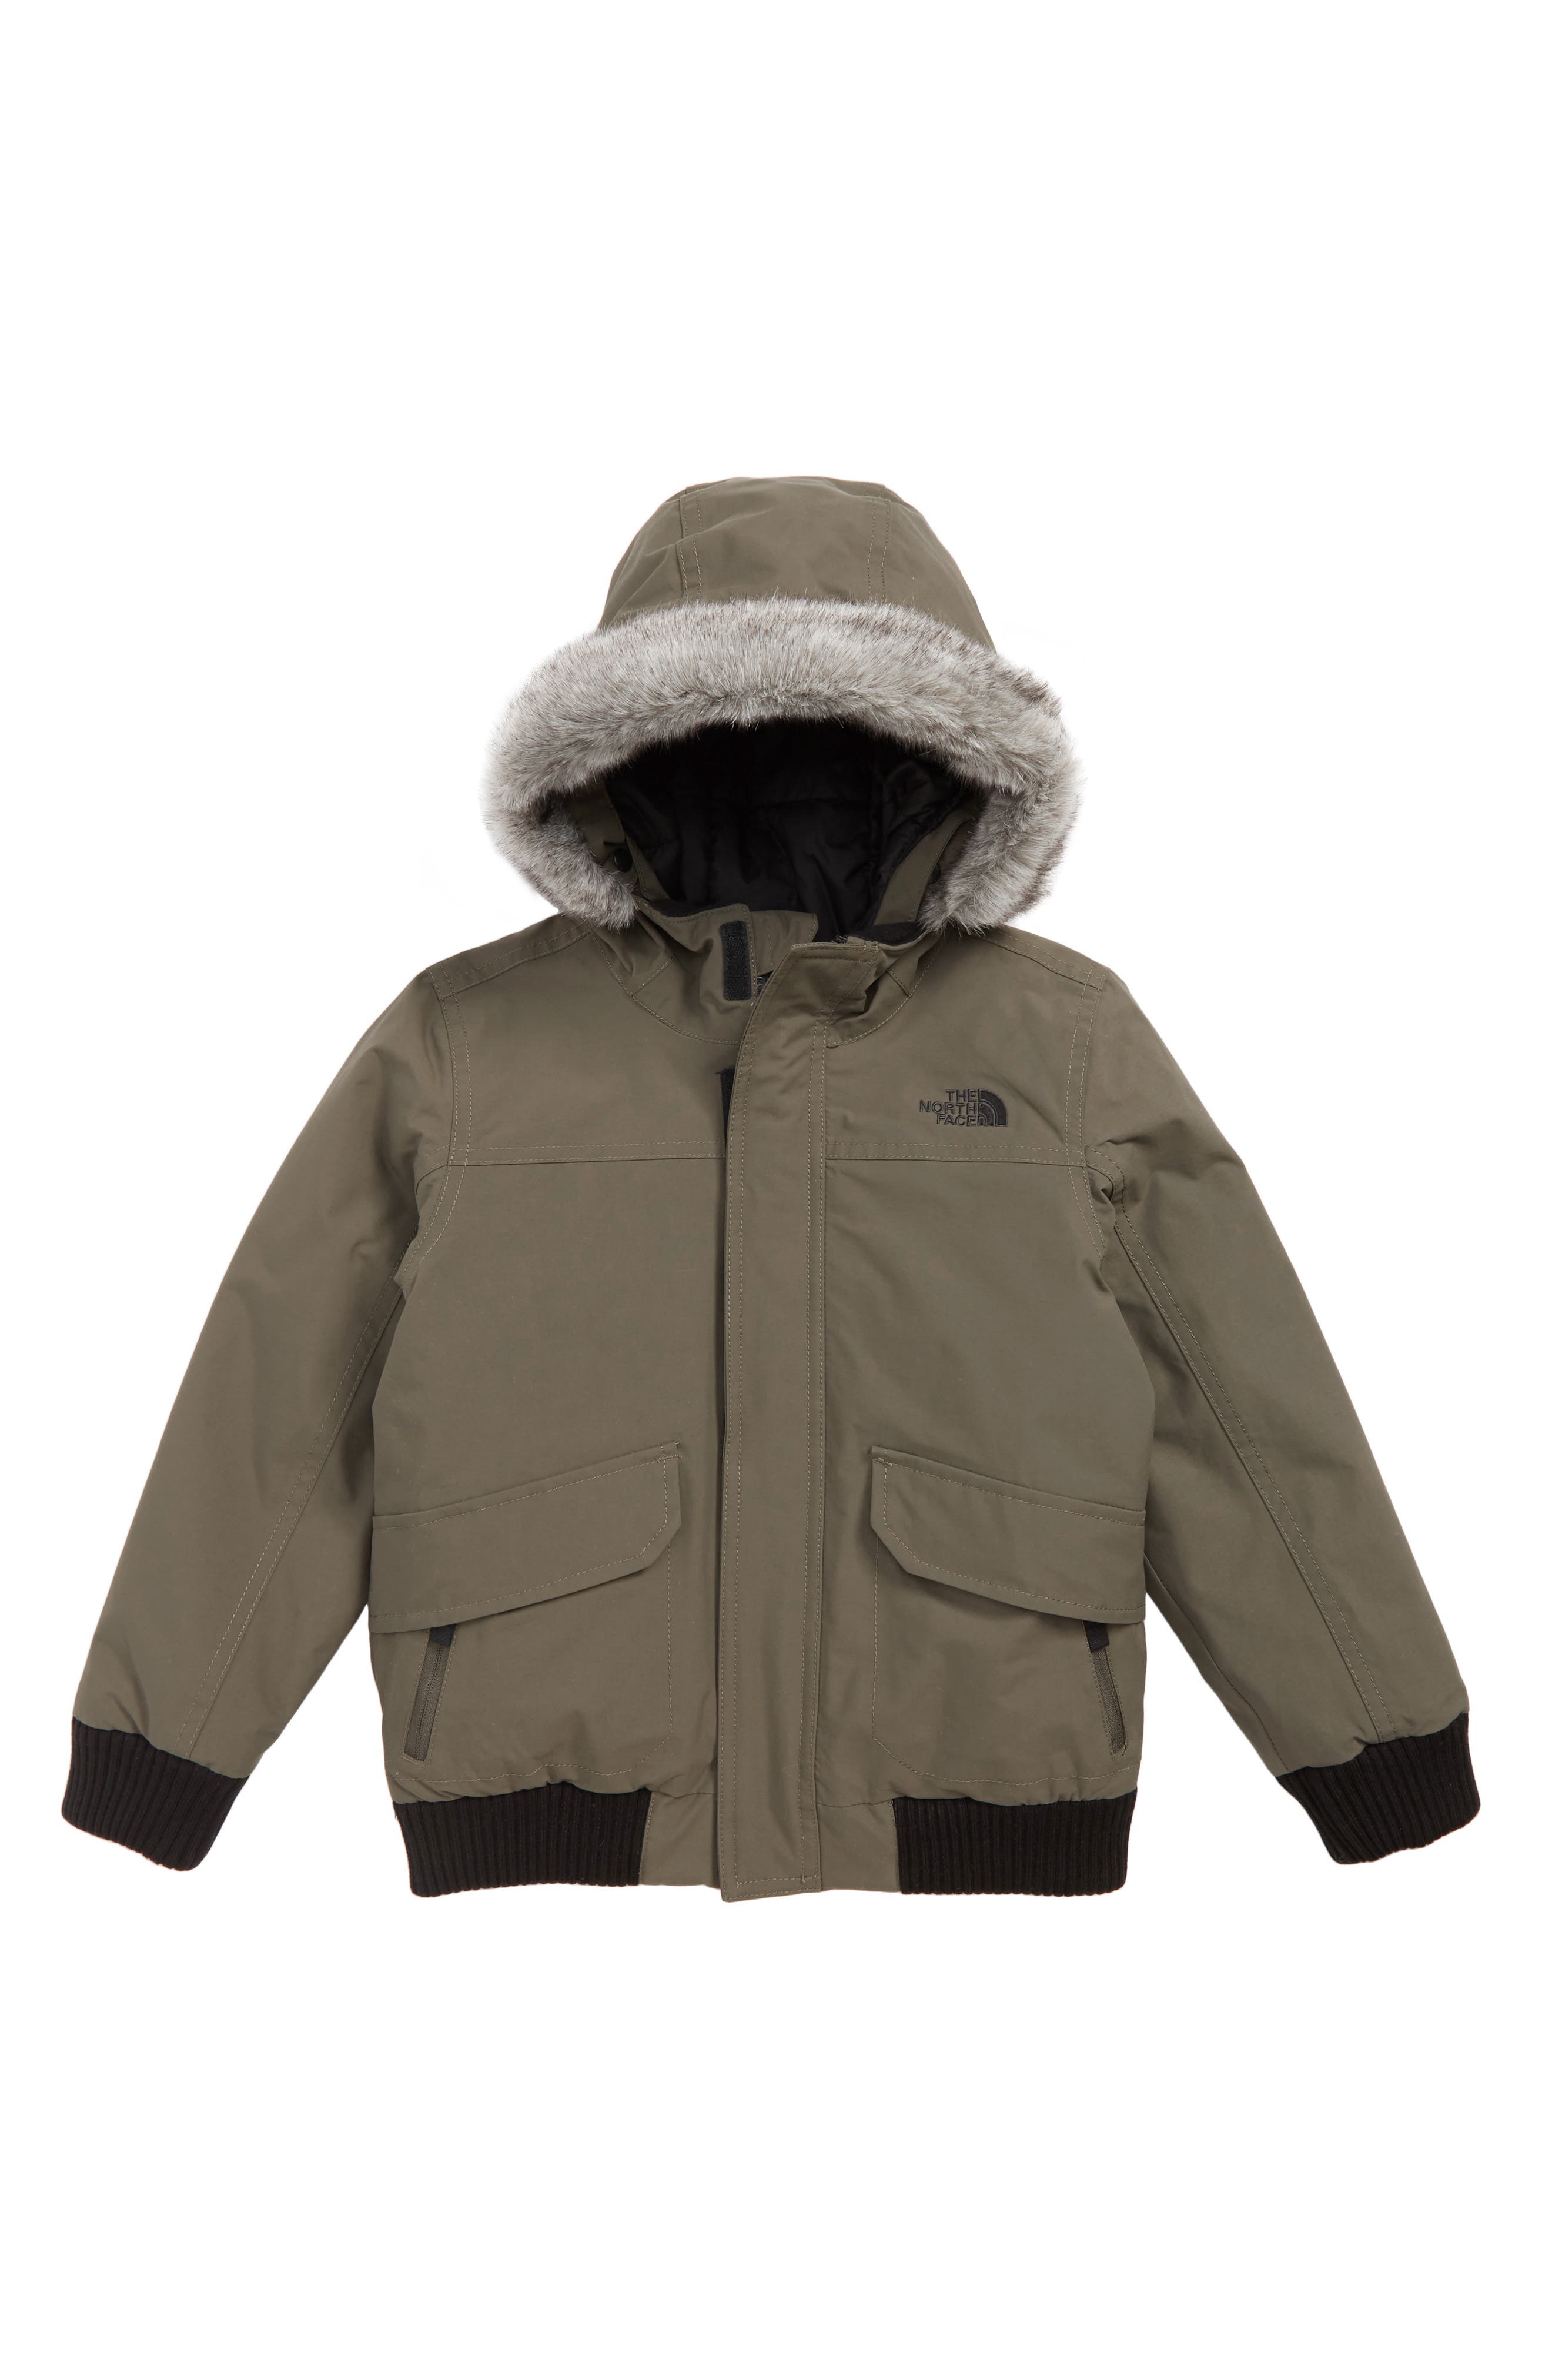 north face gotham toddler